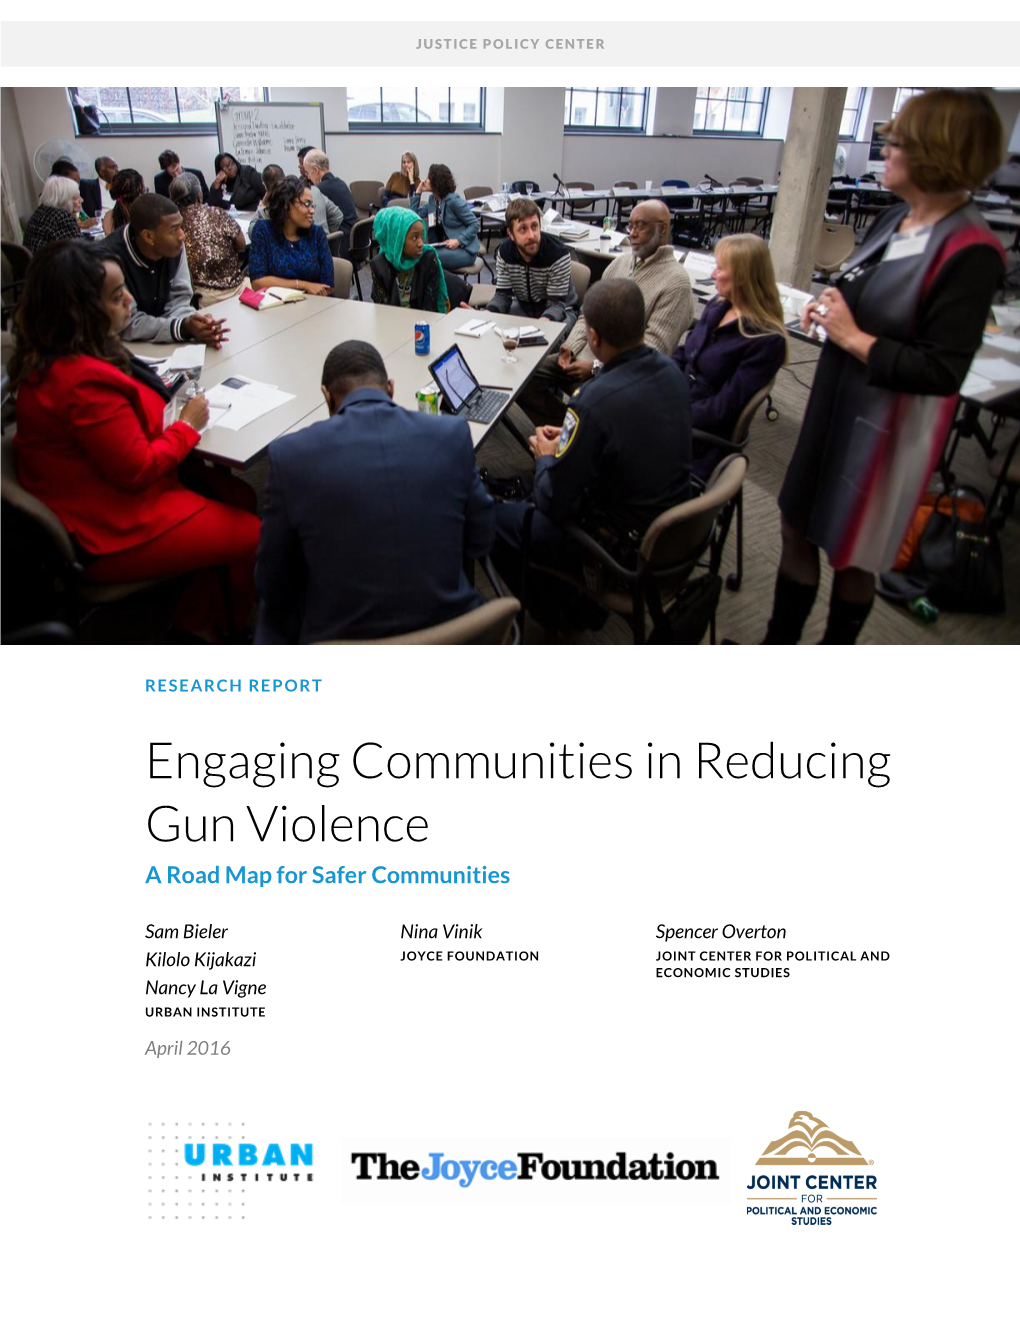 Engaging Communities in Reducing Gun Violence a Road Map for Safer Communities